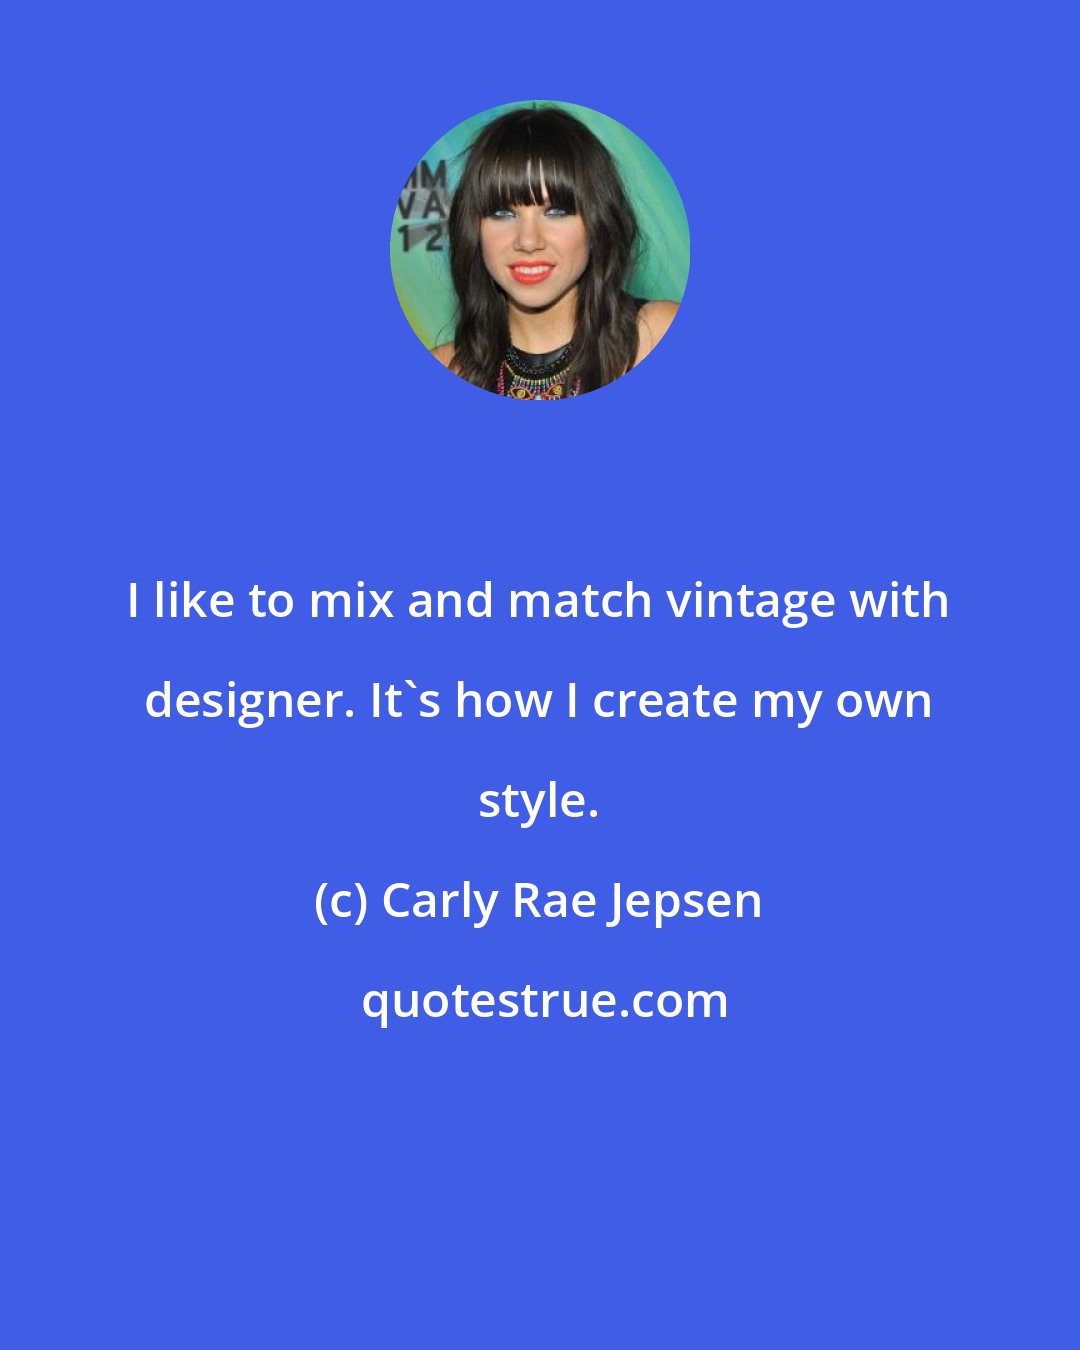 Carly Rae Jepsen: I like to mix and match vintage with designer. It's how I create my own style.